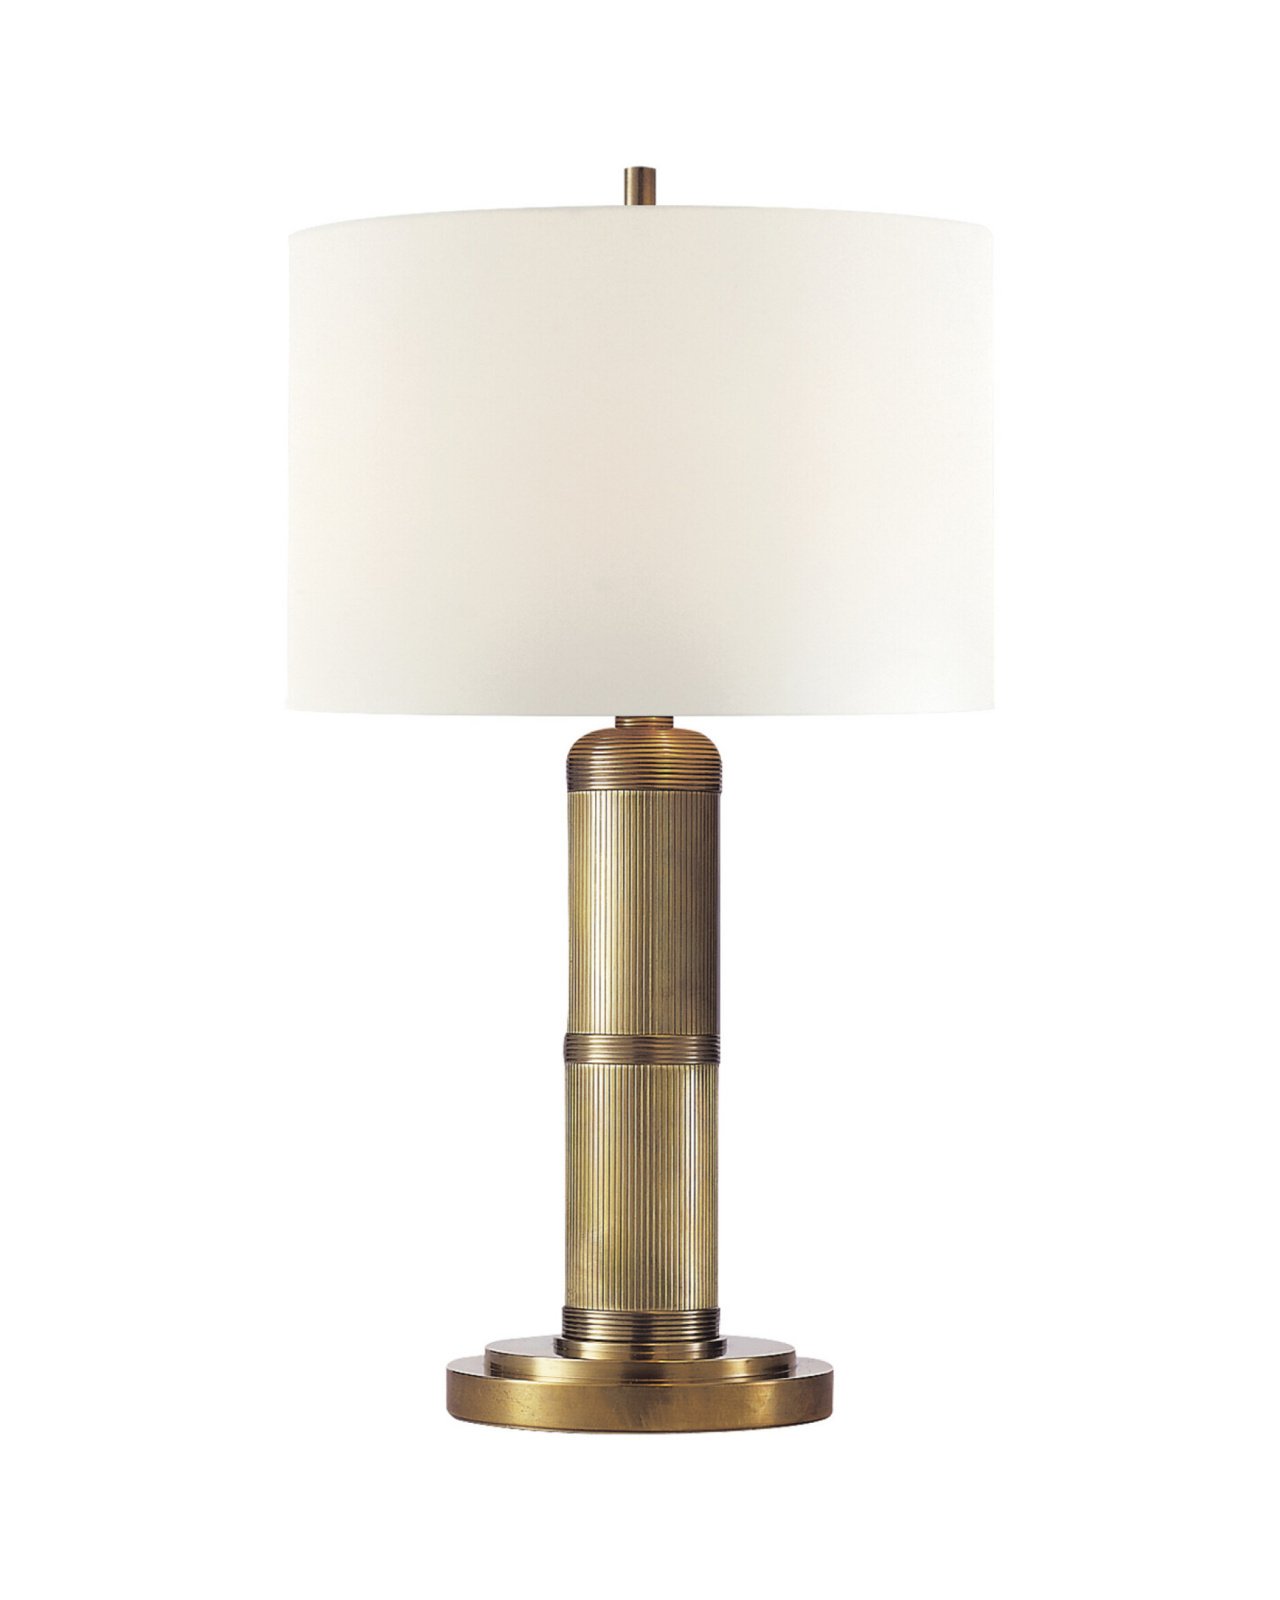 Longacre Table Lamp Antique Brass Small